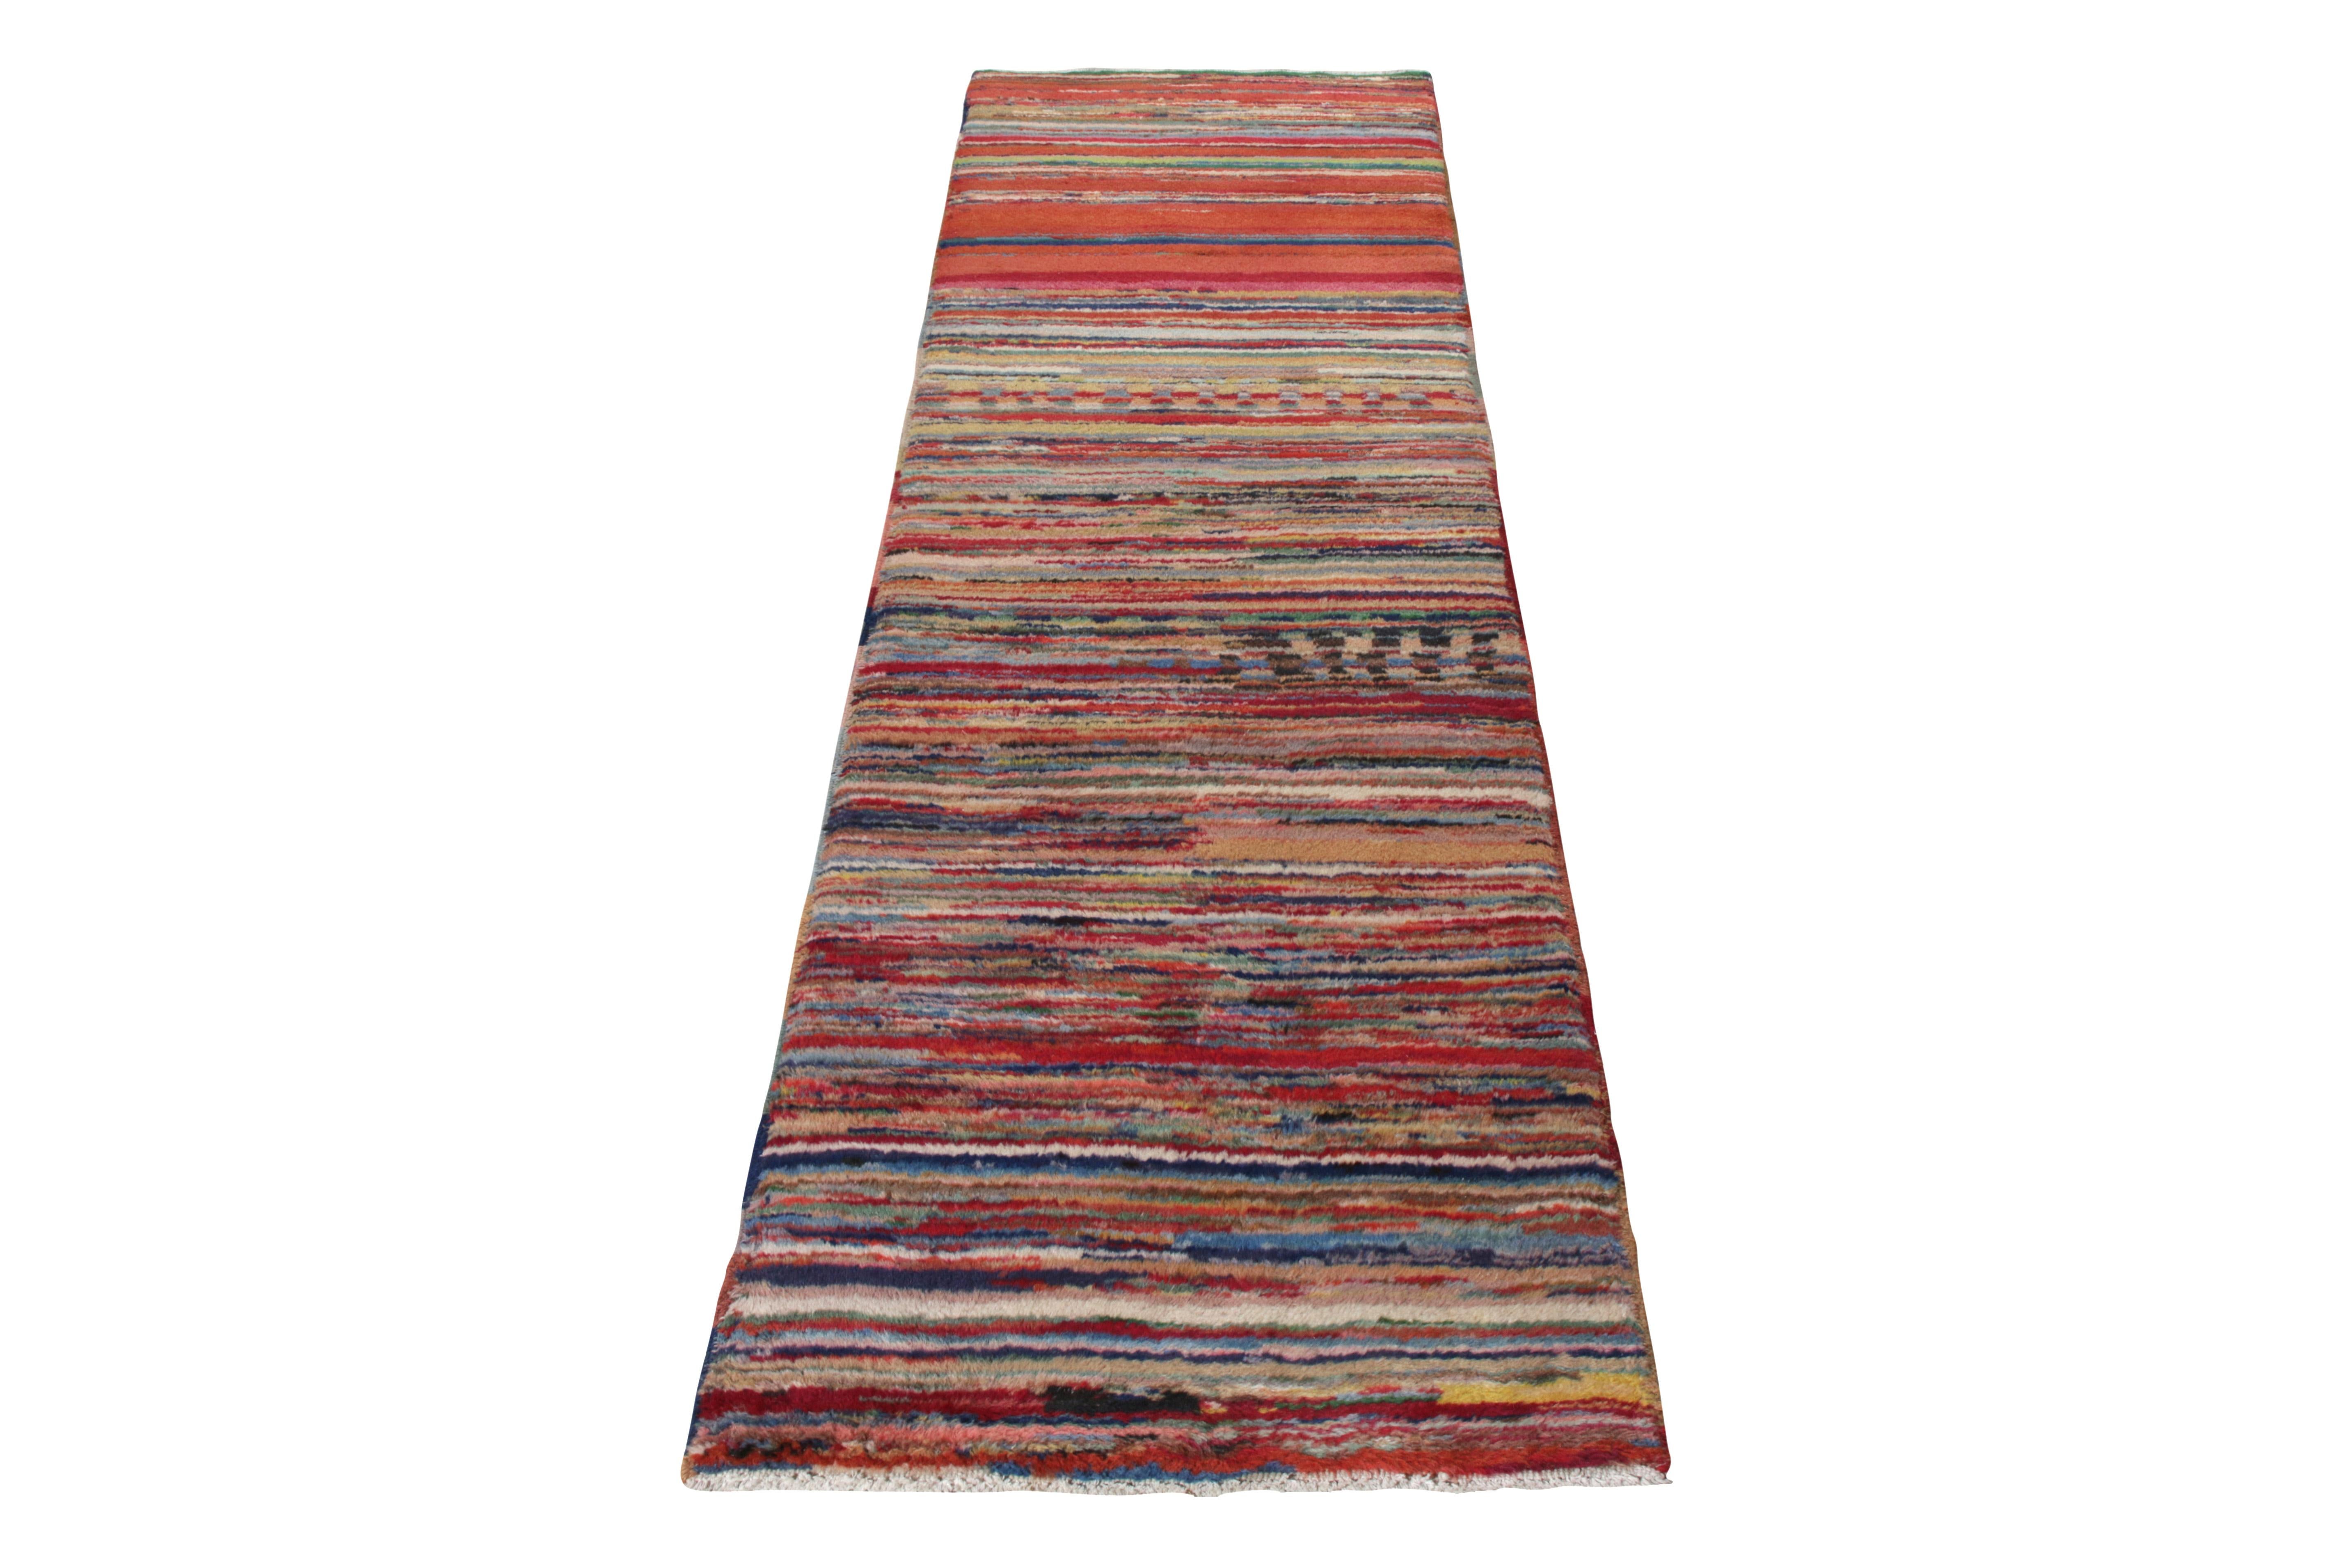 Celebrating the mid-century style of the 1960s, Rug & Kilim presents this 2x8 Turkish vintage runner crafted by Zeki Muren from their commemorative Mid-Century Pasha Collection. Hand-knotted in wool, this piece enjoys a montage of striations and